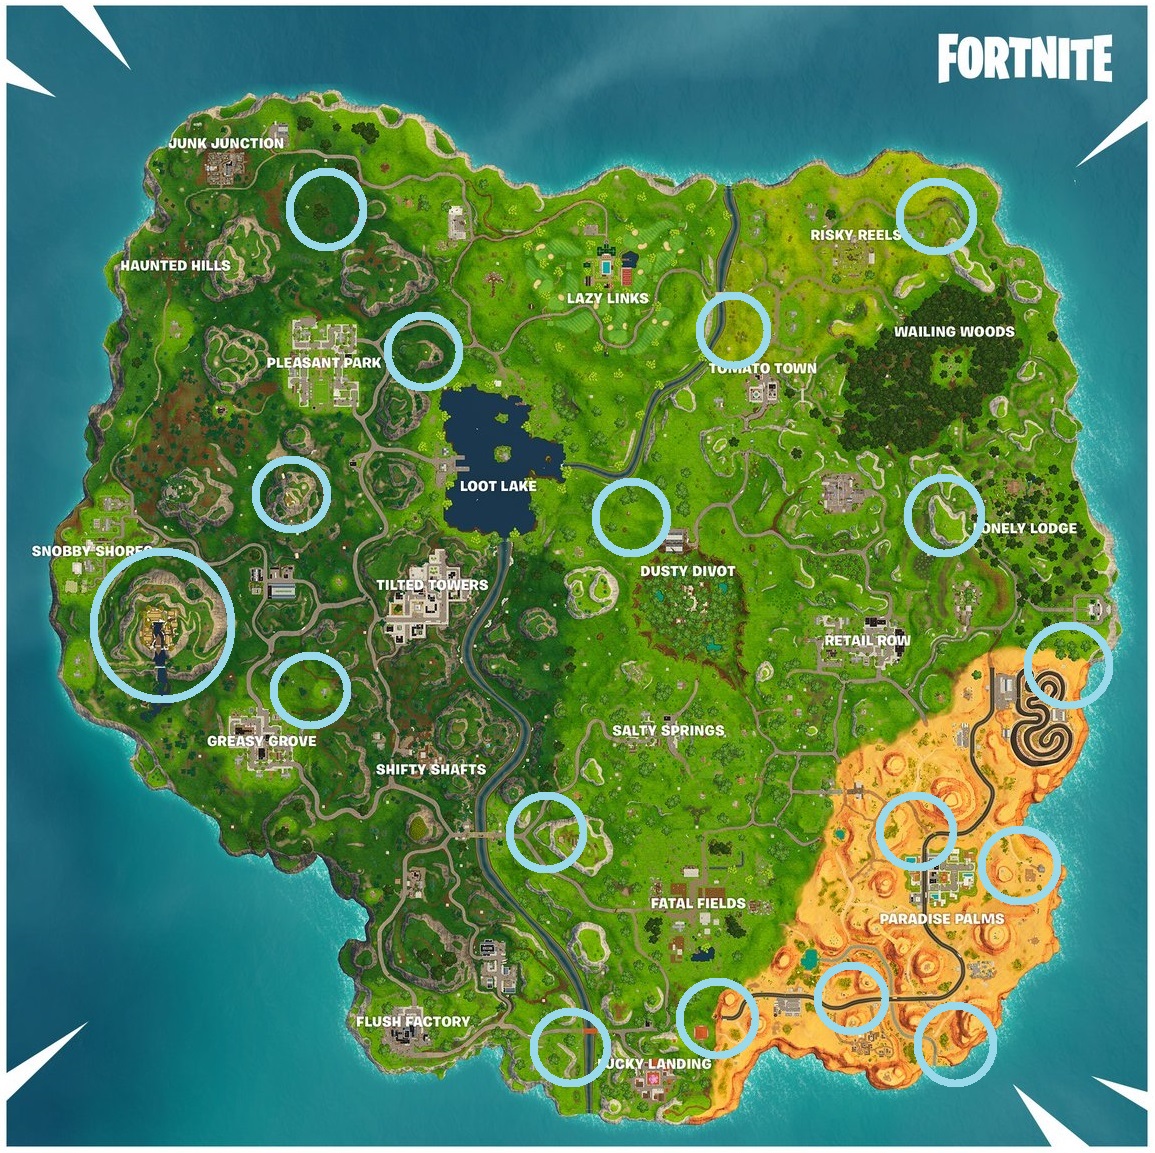 once you re finished teleporting through rift portals in fortnite be sure to search the location marked on the snobby shores treasure map to complete - portals in fortnite map code